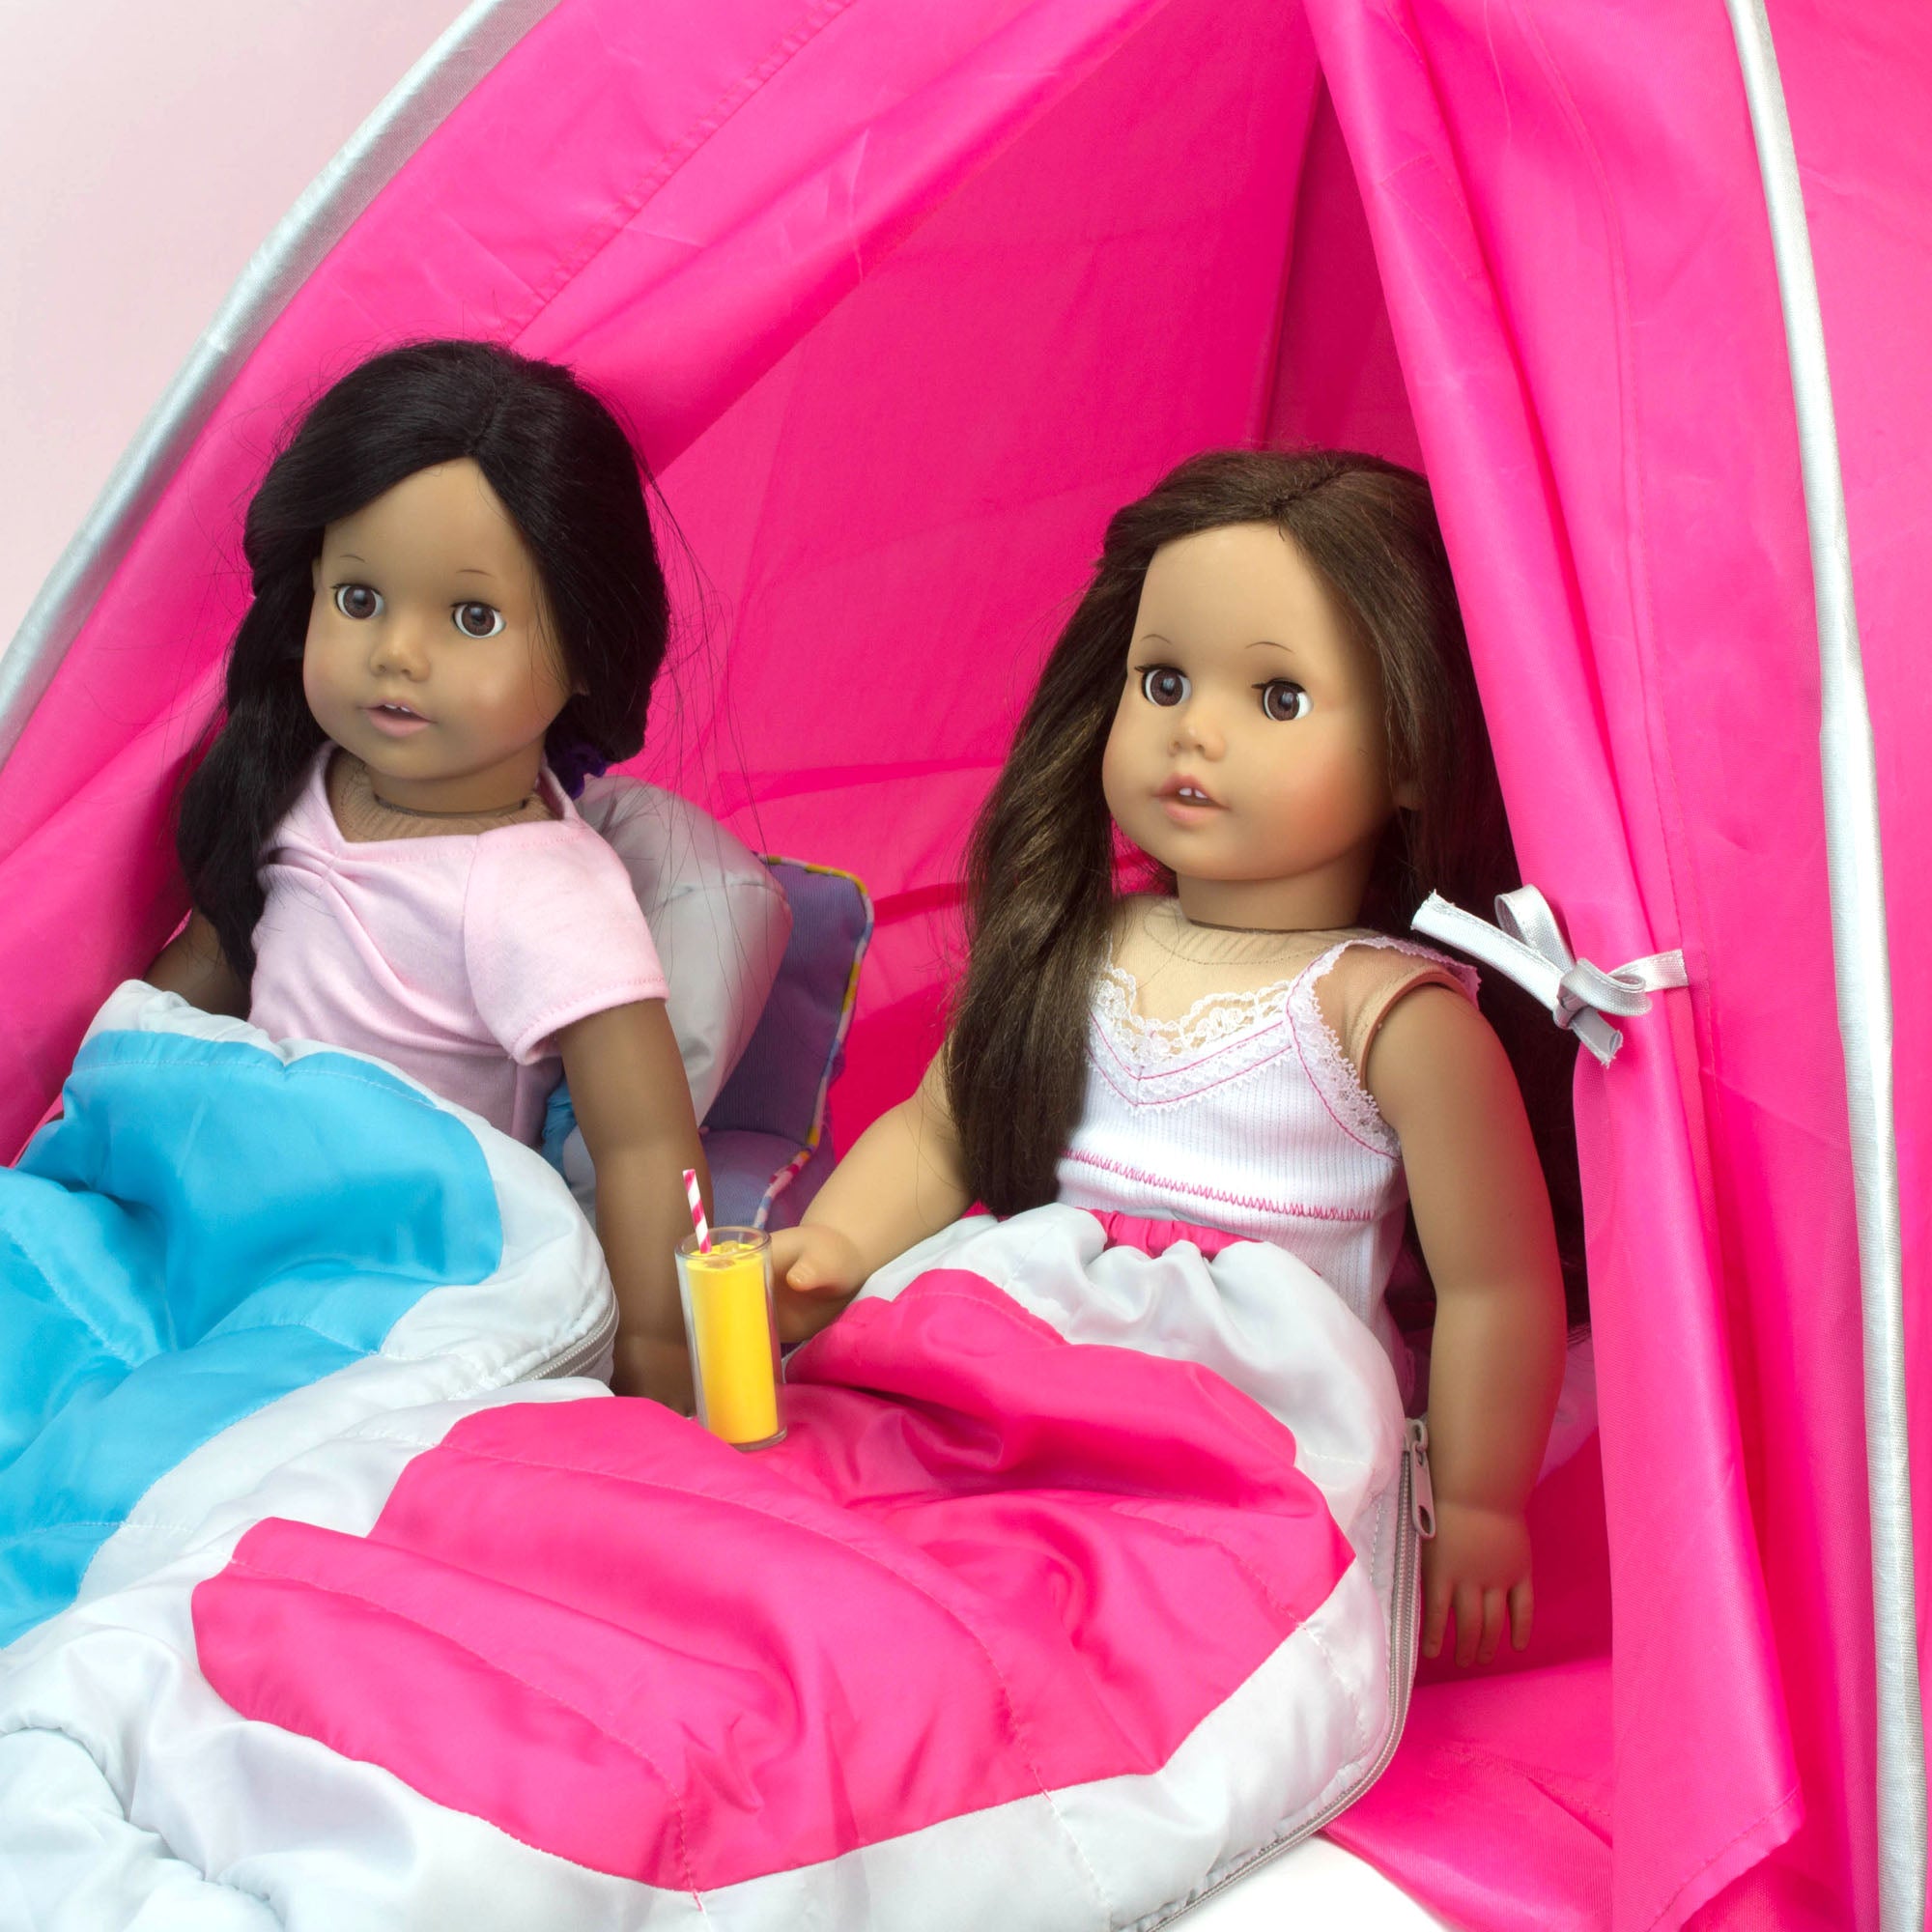 Sophia’s Super Cute Two-Toned Pretend Play Cocoon Style Outdoor Camping Essential Sleeping Bag for 18” Dolls, Hot Pink/Gray